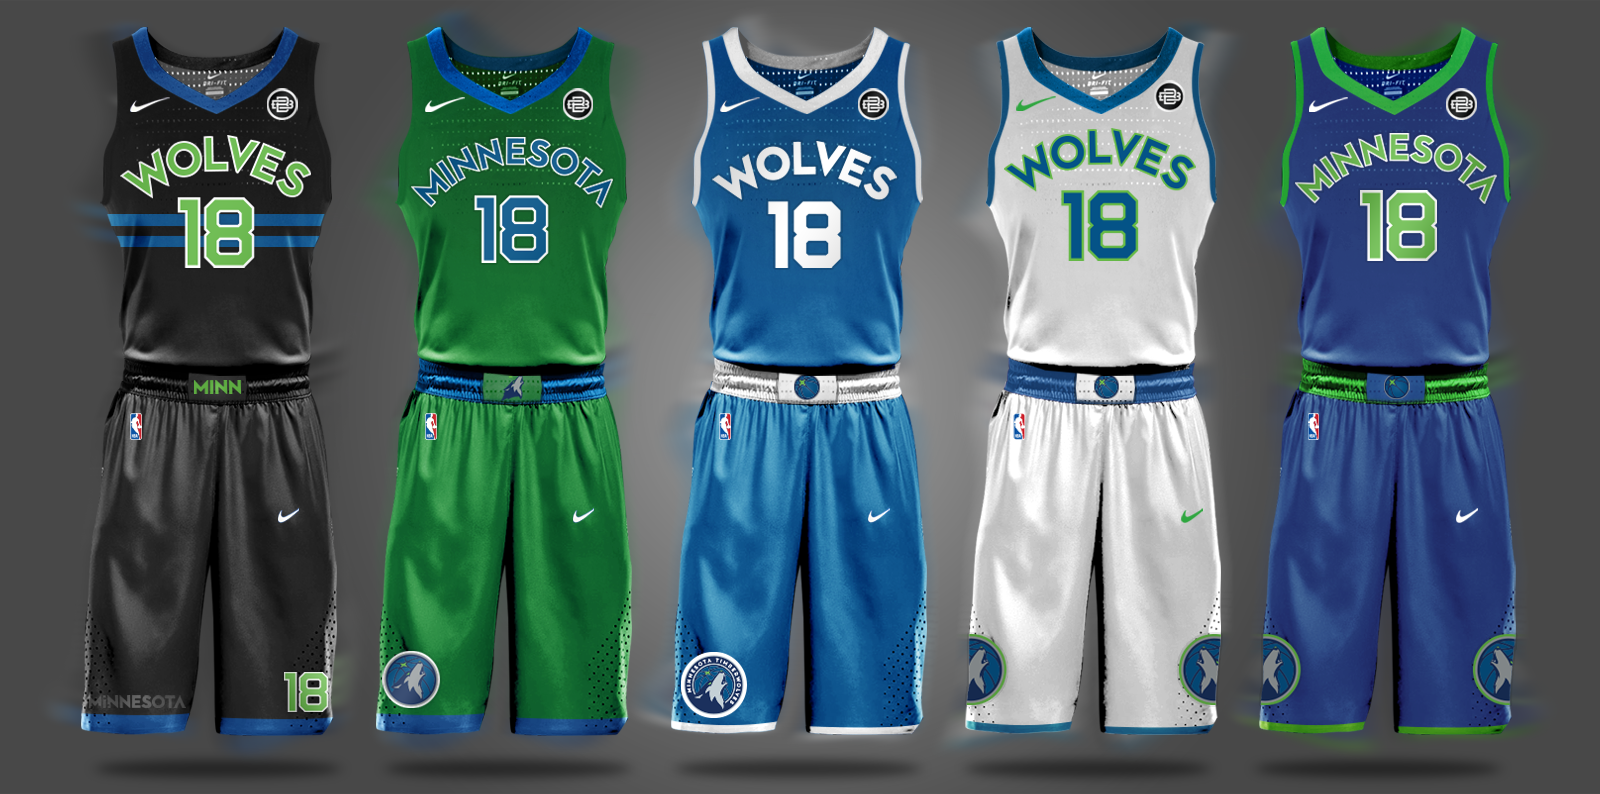 NBA, NFL, and MLB Building Community Through New Uniforms – The